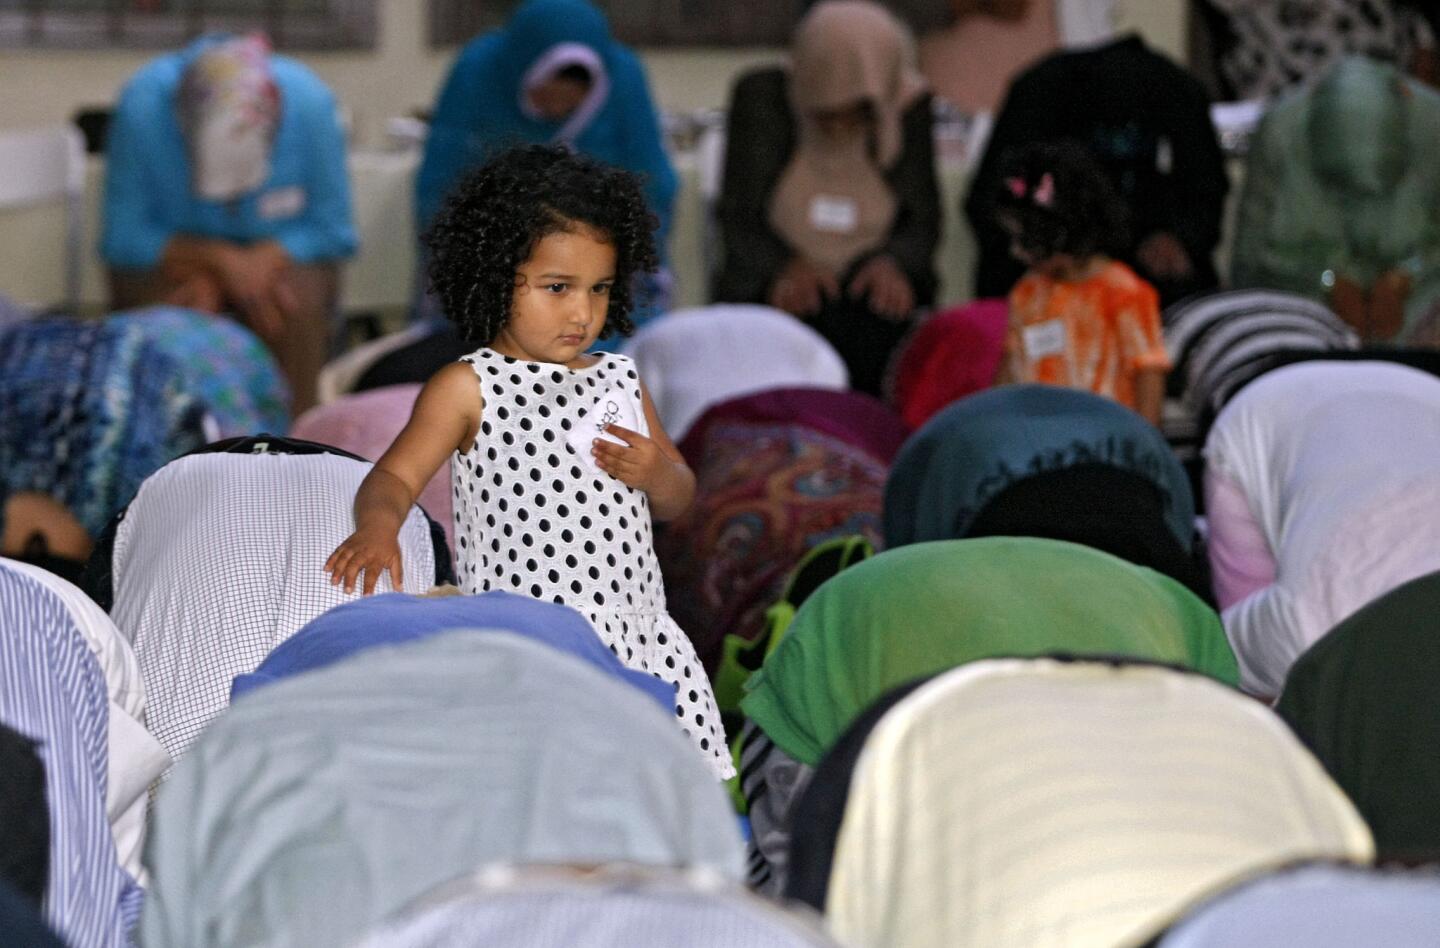 Reya Etman, 2 of La Canada Flintridge, stands next to her father Mohamed Etman during the Ramadan Maghrib, evening prayer, at the Community Center of La Canada Flintridge on Friday, July 12, 2013. About 150 people attended the Iftar, breaking of fast, and the short prayer before eating a pot luck meal after sundown. The event was put on by the Islamic Congregation of La Canada Flintridge.